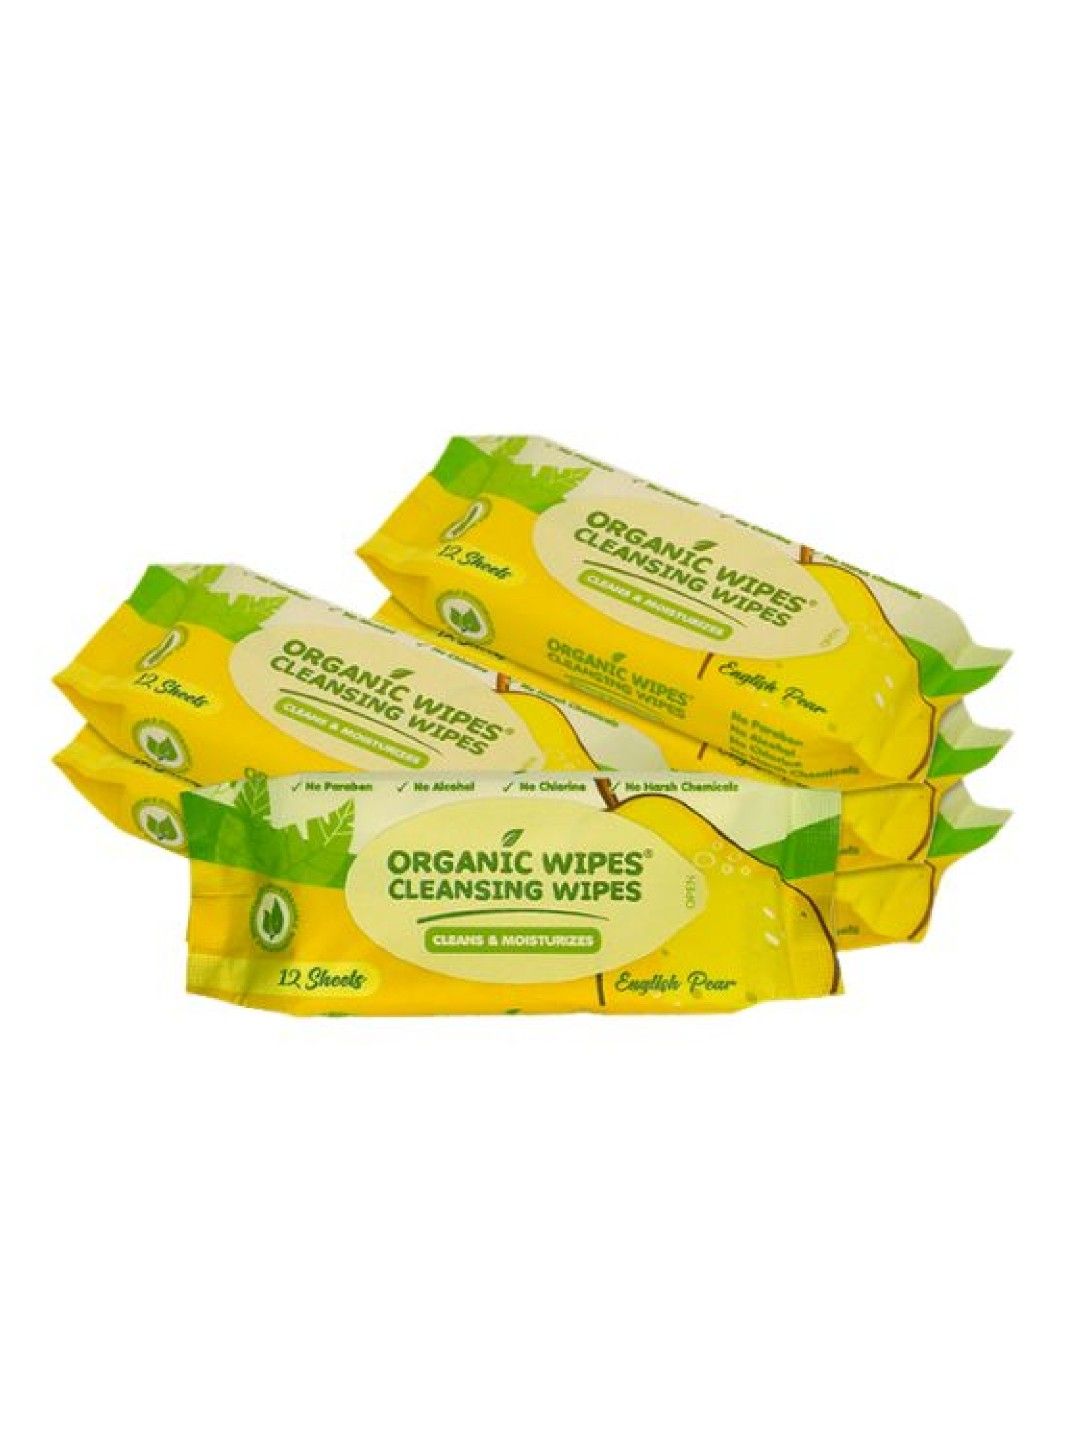 Organic Baby Wipes Organic Wipes Cleansing Wipes English Pear (12s x 6-pack)